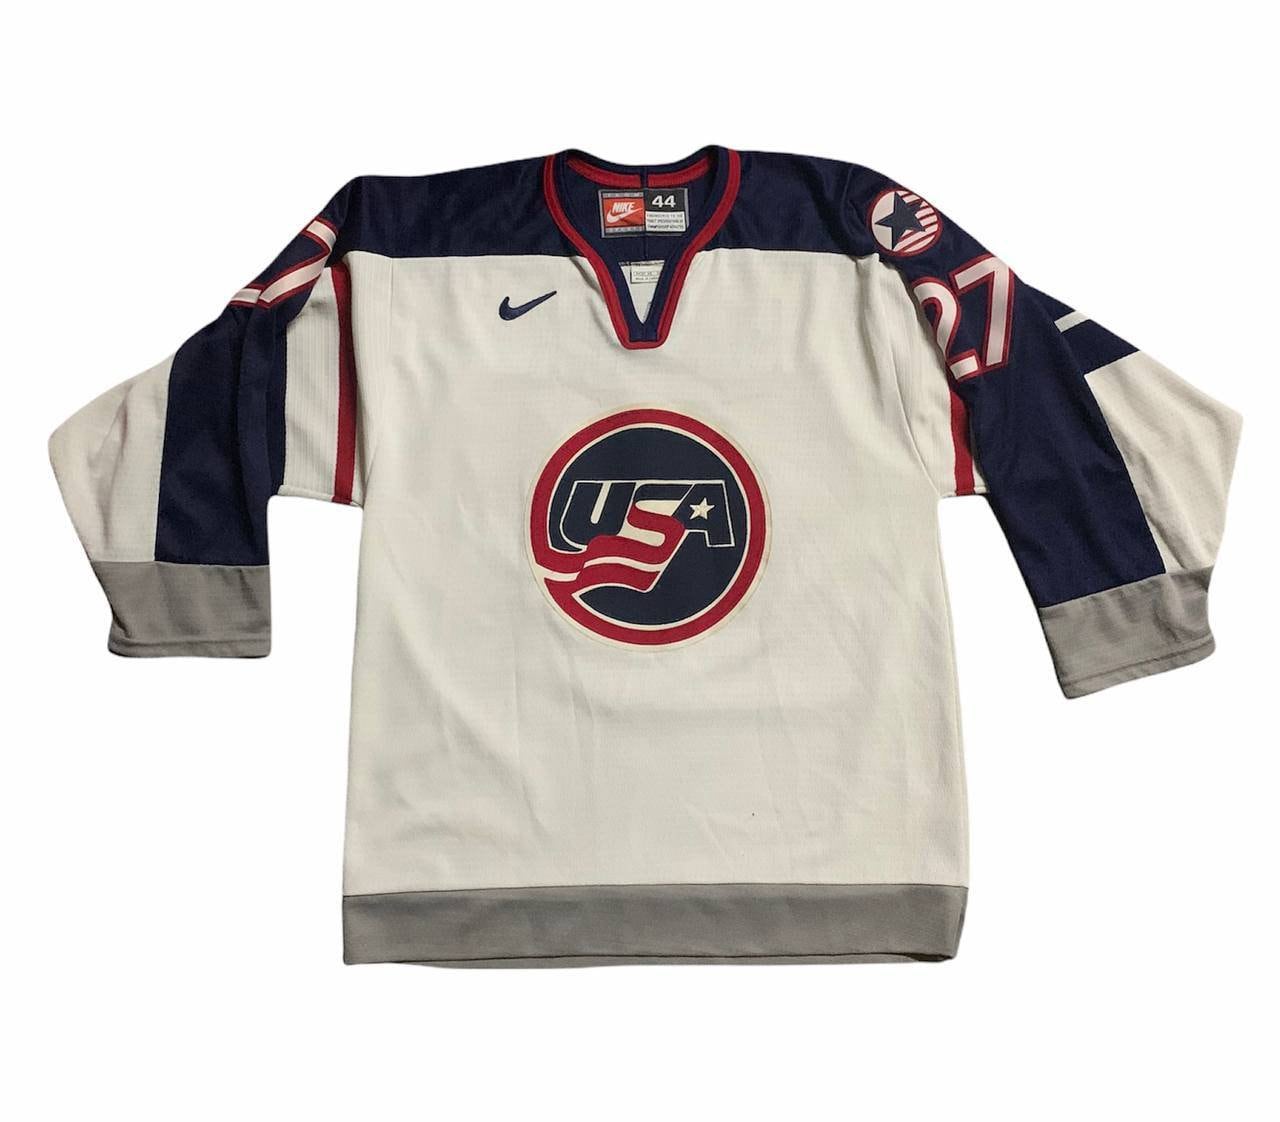 K-1 STITCHED USA HOCKEY JERSEY WITH TIE LACES ADULT MEDIUM NEW WITHOUT TAGS